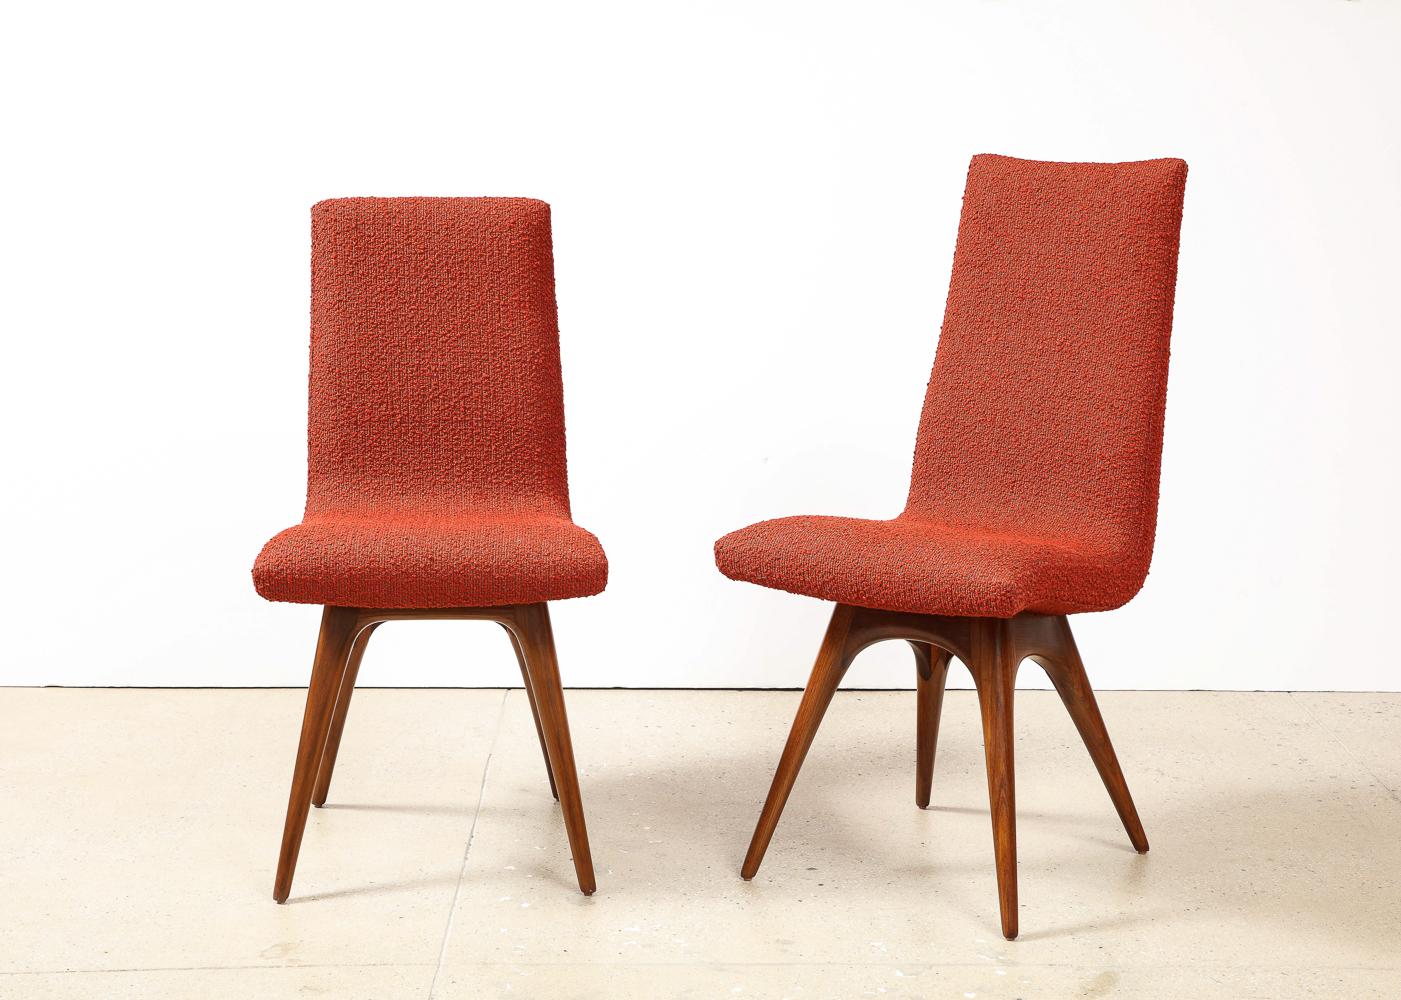 Set of 8 Nexus Dining Chairs by Vladimir Kagan.  Walnut, upholstery. 8 armless chairs including 2 taller chairs & 6 lower side chairs. Beautifully sculpted walnut bases. Upholstered in rust-red boucle.

